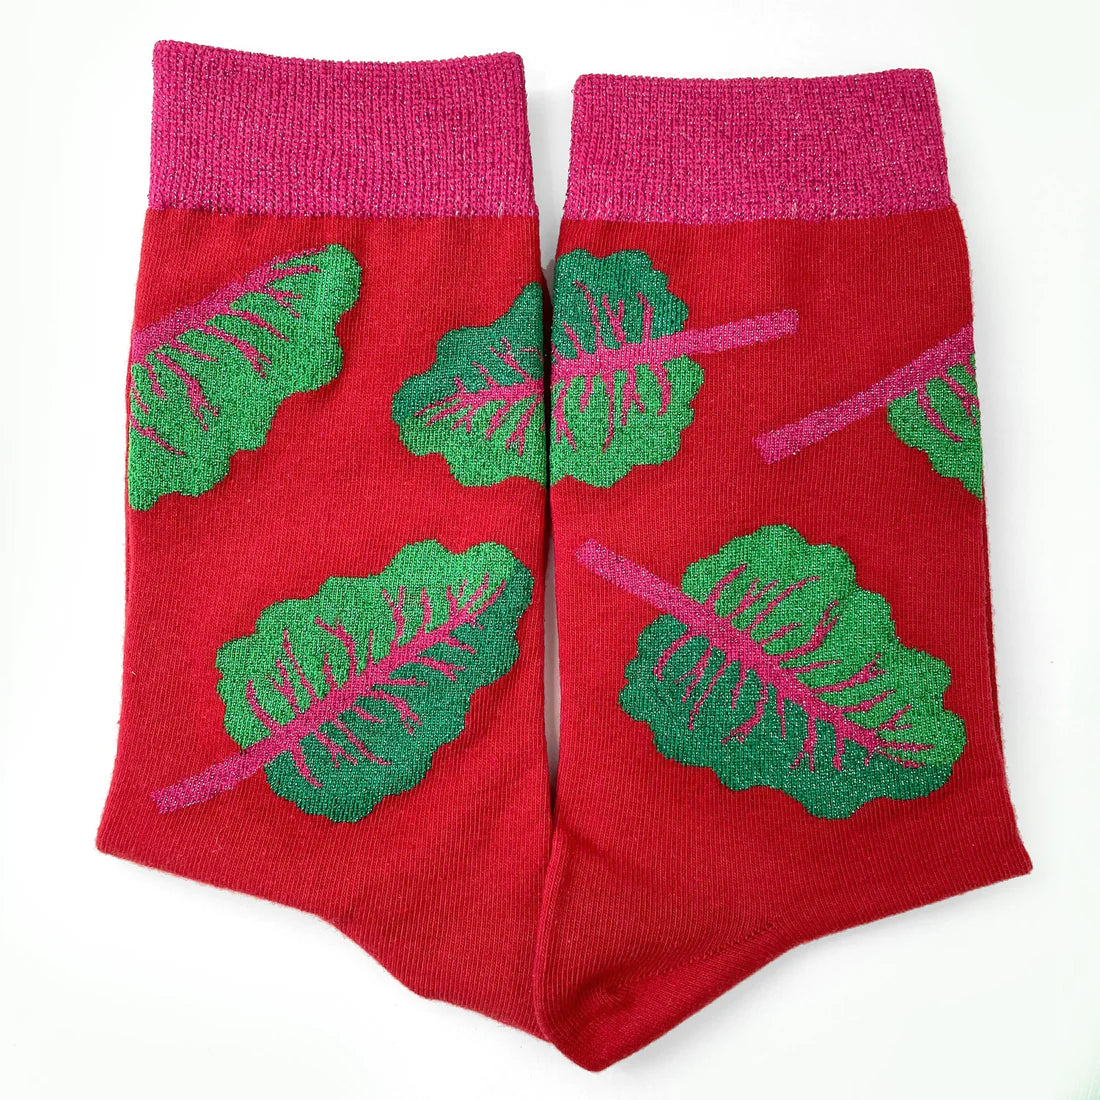 Pair of dark red socks designed with glittery chard leaves on it